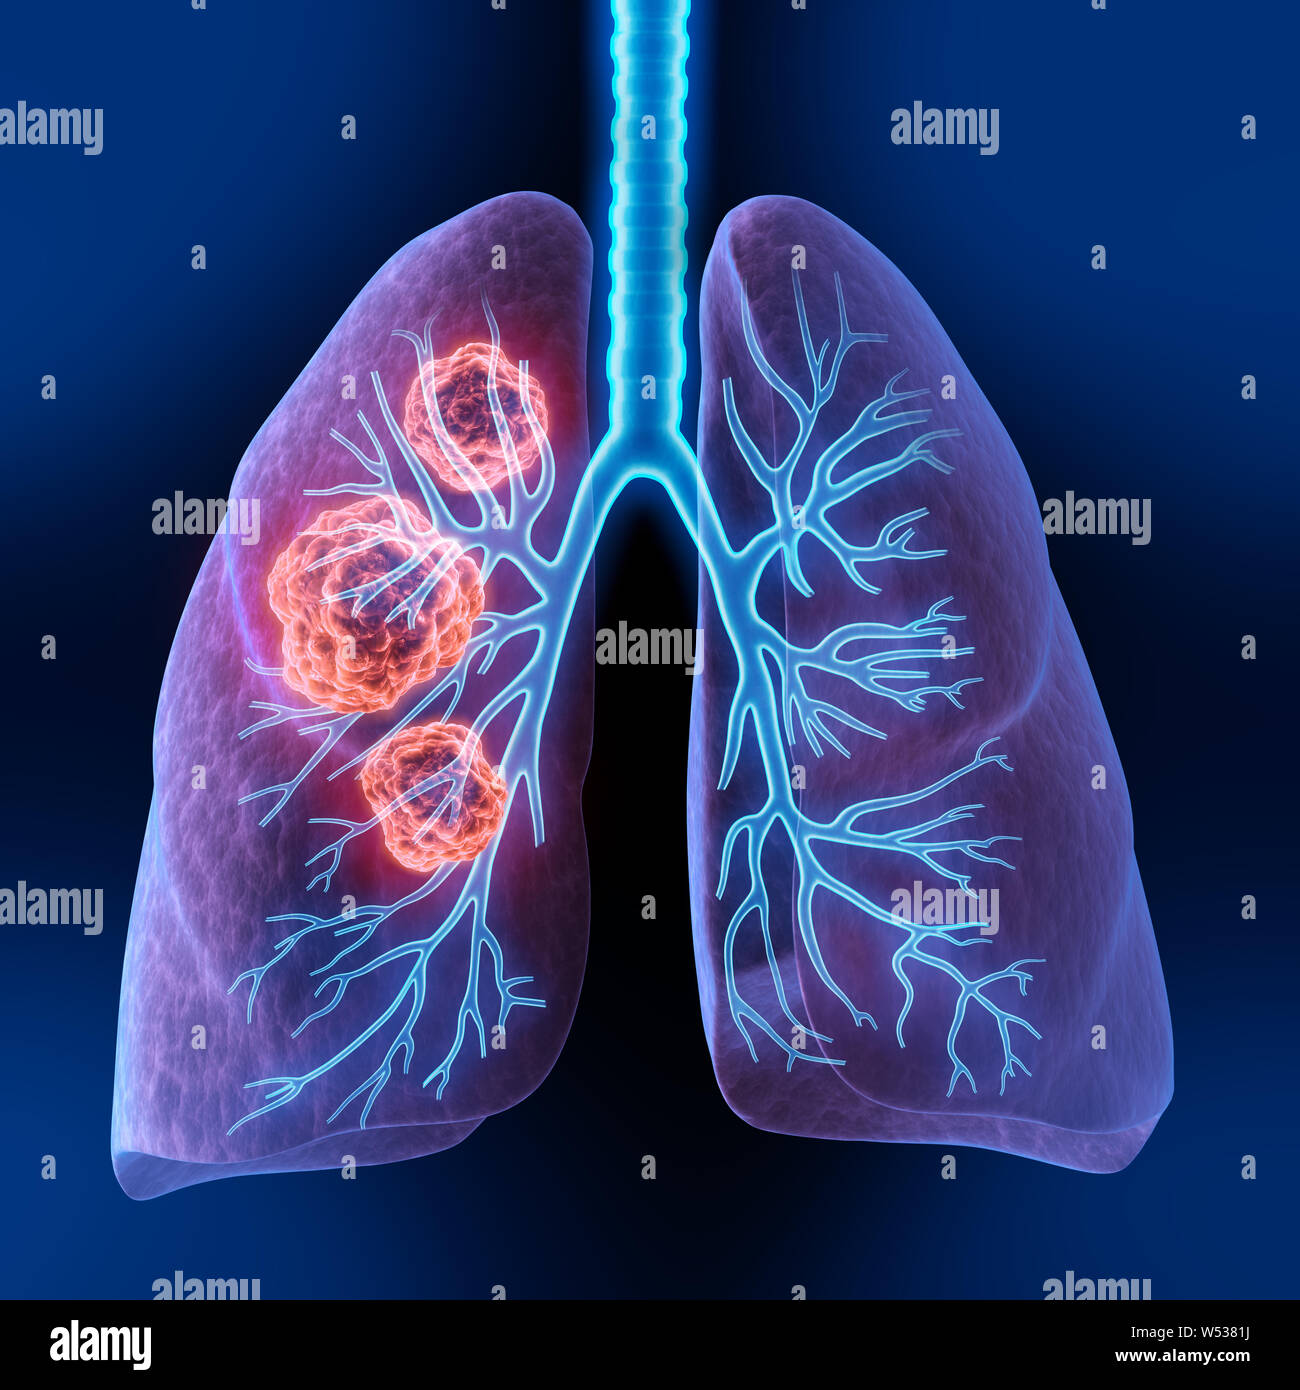 Human body - lungs with tumors - 3d Illustration- 3d Illustration Stock Photo